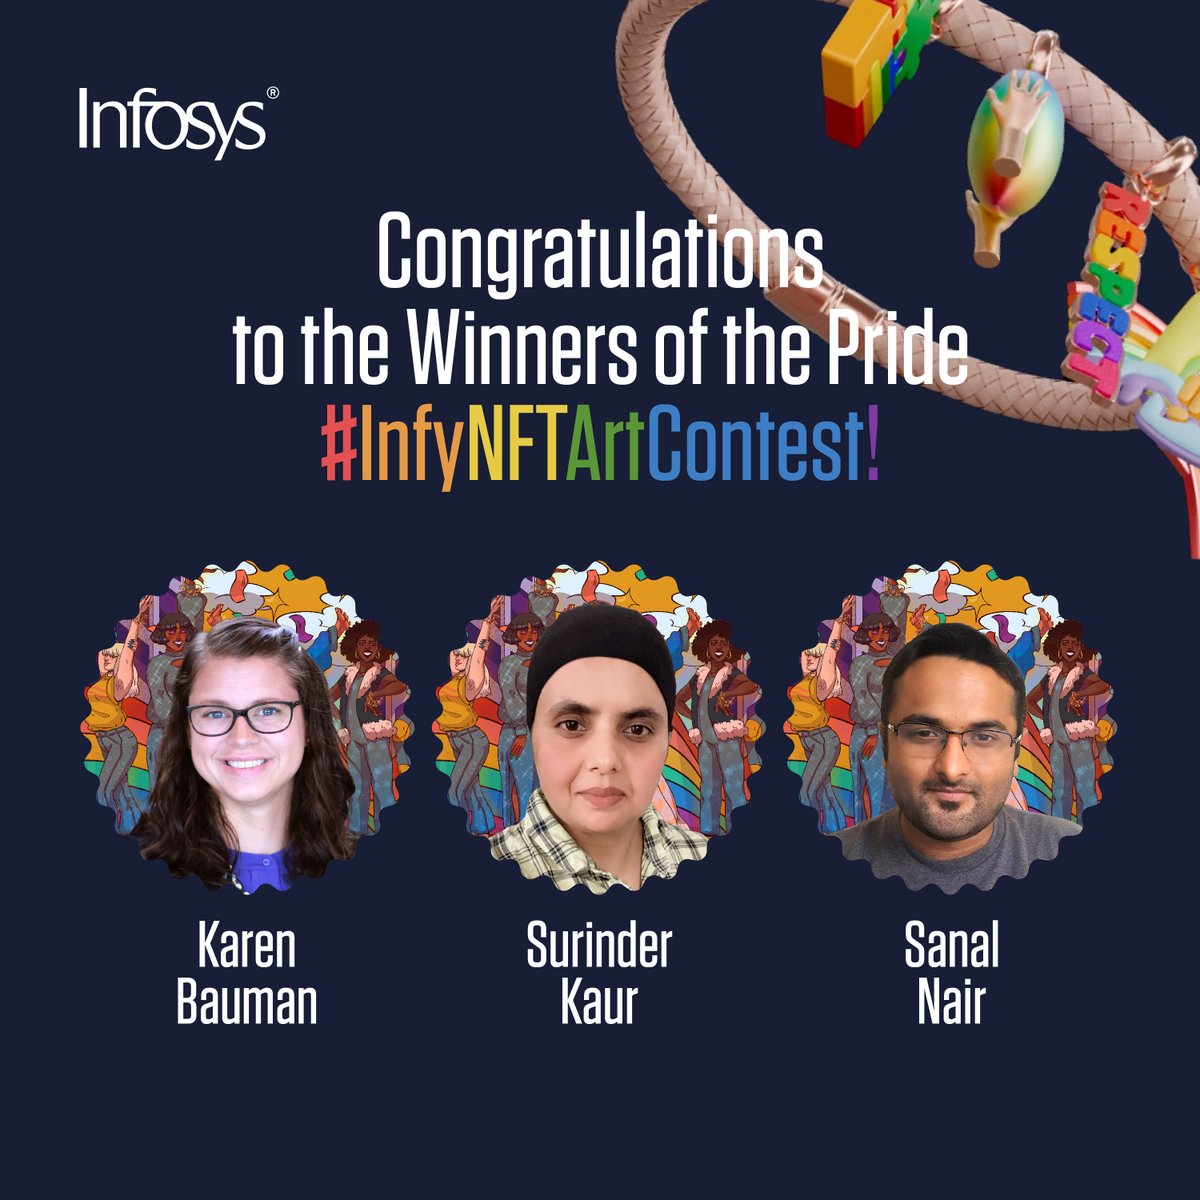 Congratulations to the winners of our #InfyNFTArtContest Karen Bauman, Surinder Kaur, and Sanal Nair, who’ve won exclusive NFT artwork designed by Theodoor Grimes. A big thank you to everyone who participated in our contest in support of the #LGBTQIA+ community and pride month! https://t.co/vnzwVJ3A90